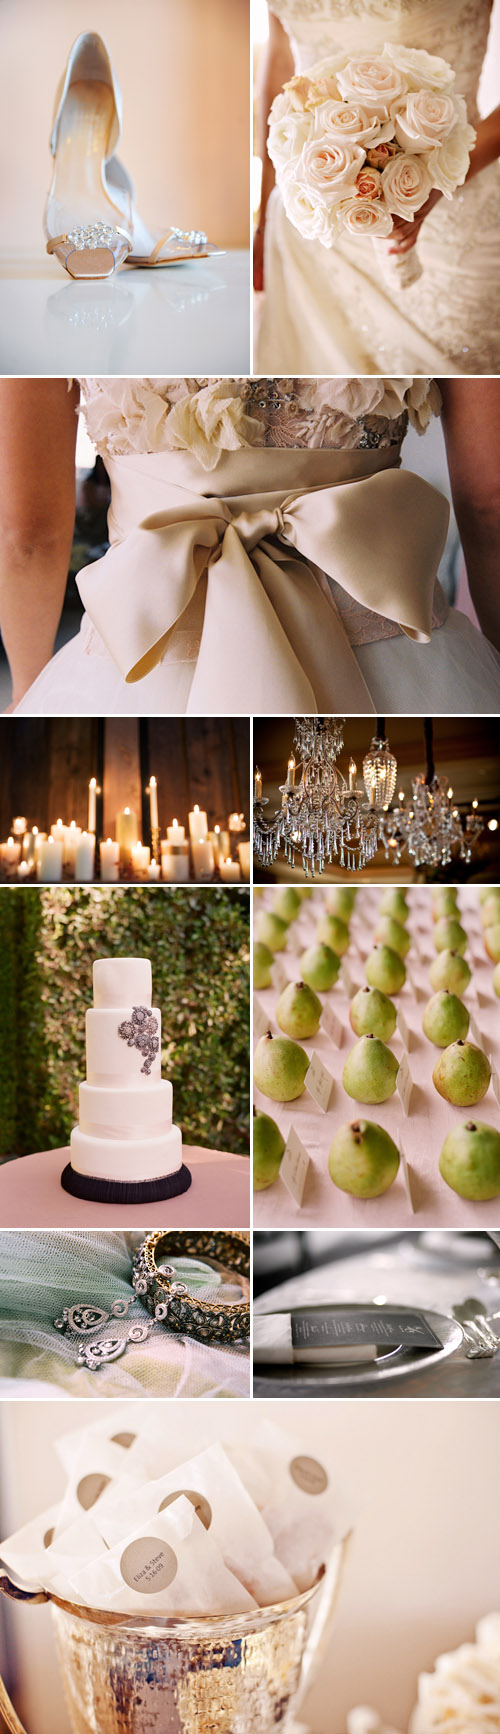 elegant ivory, champagne, silver and candle light wedding color palette inspiration board